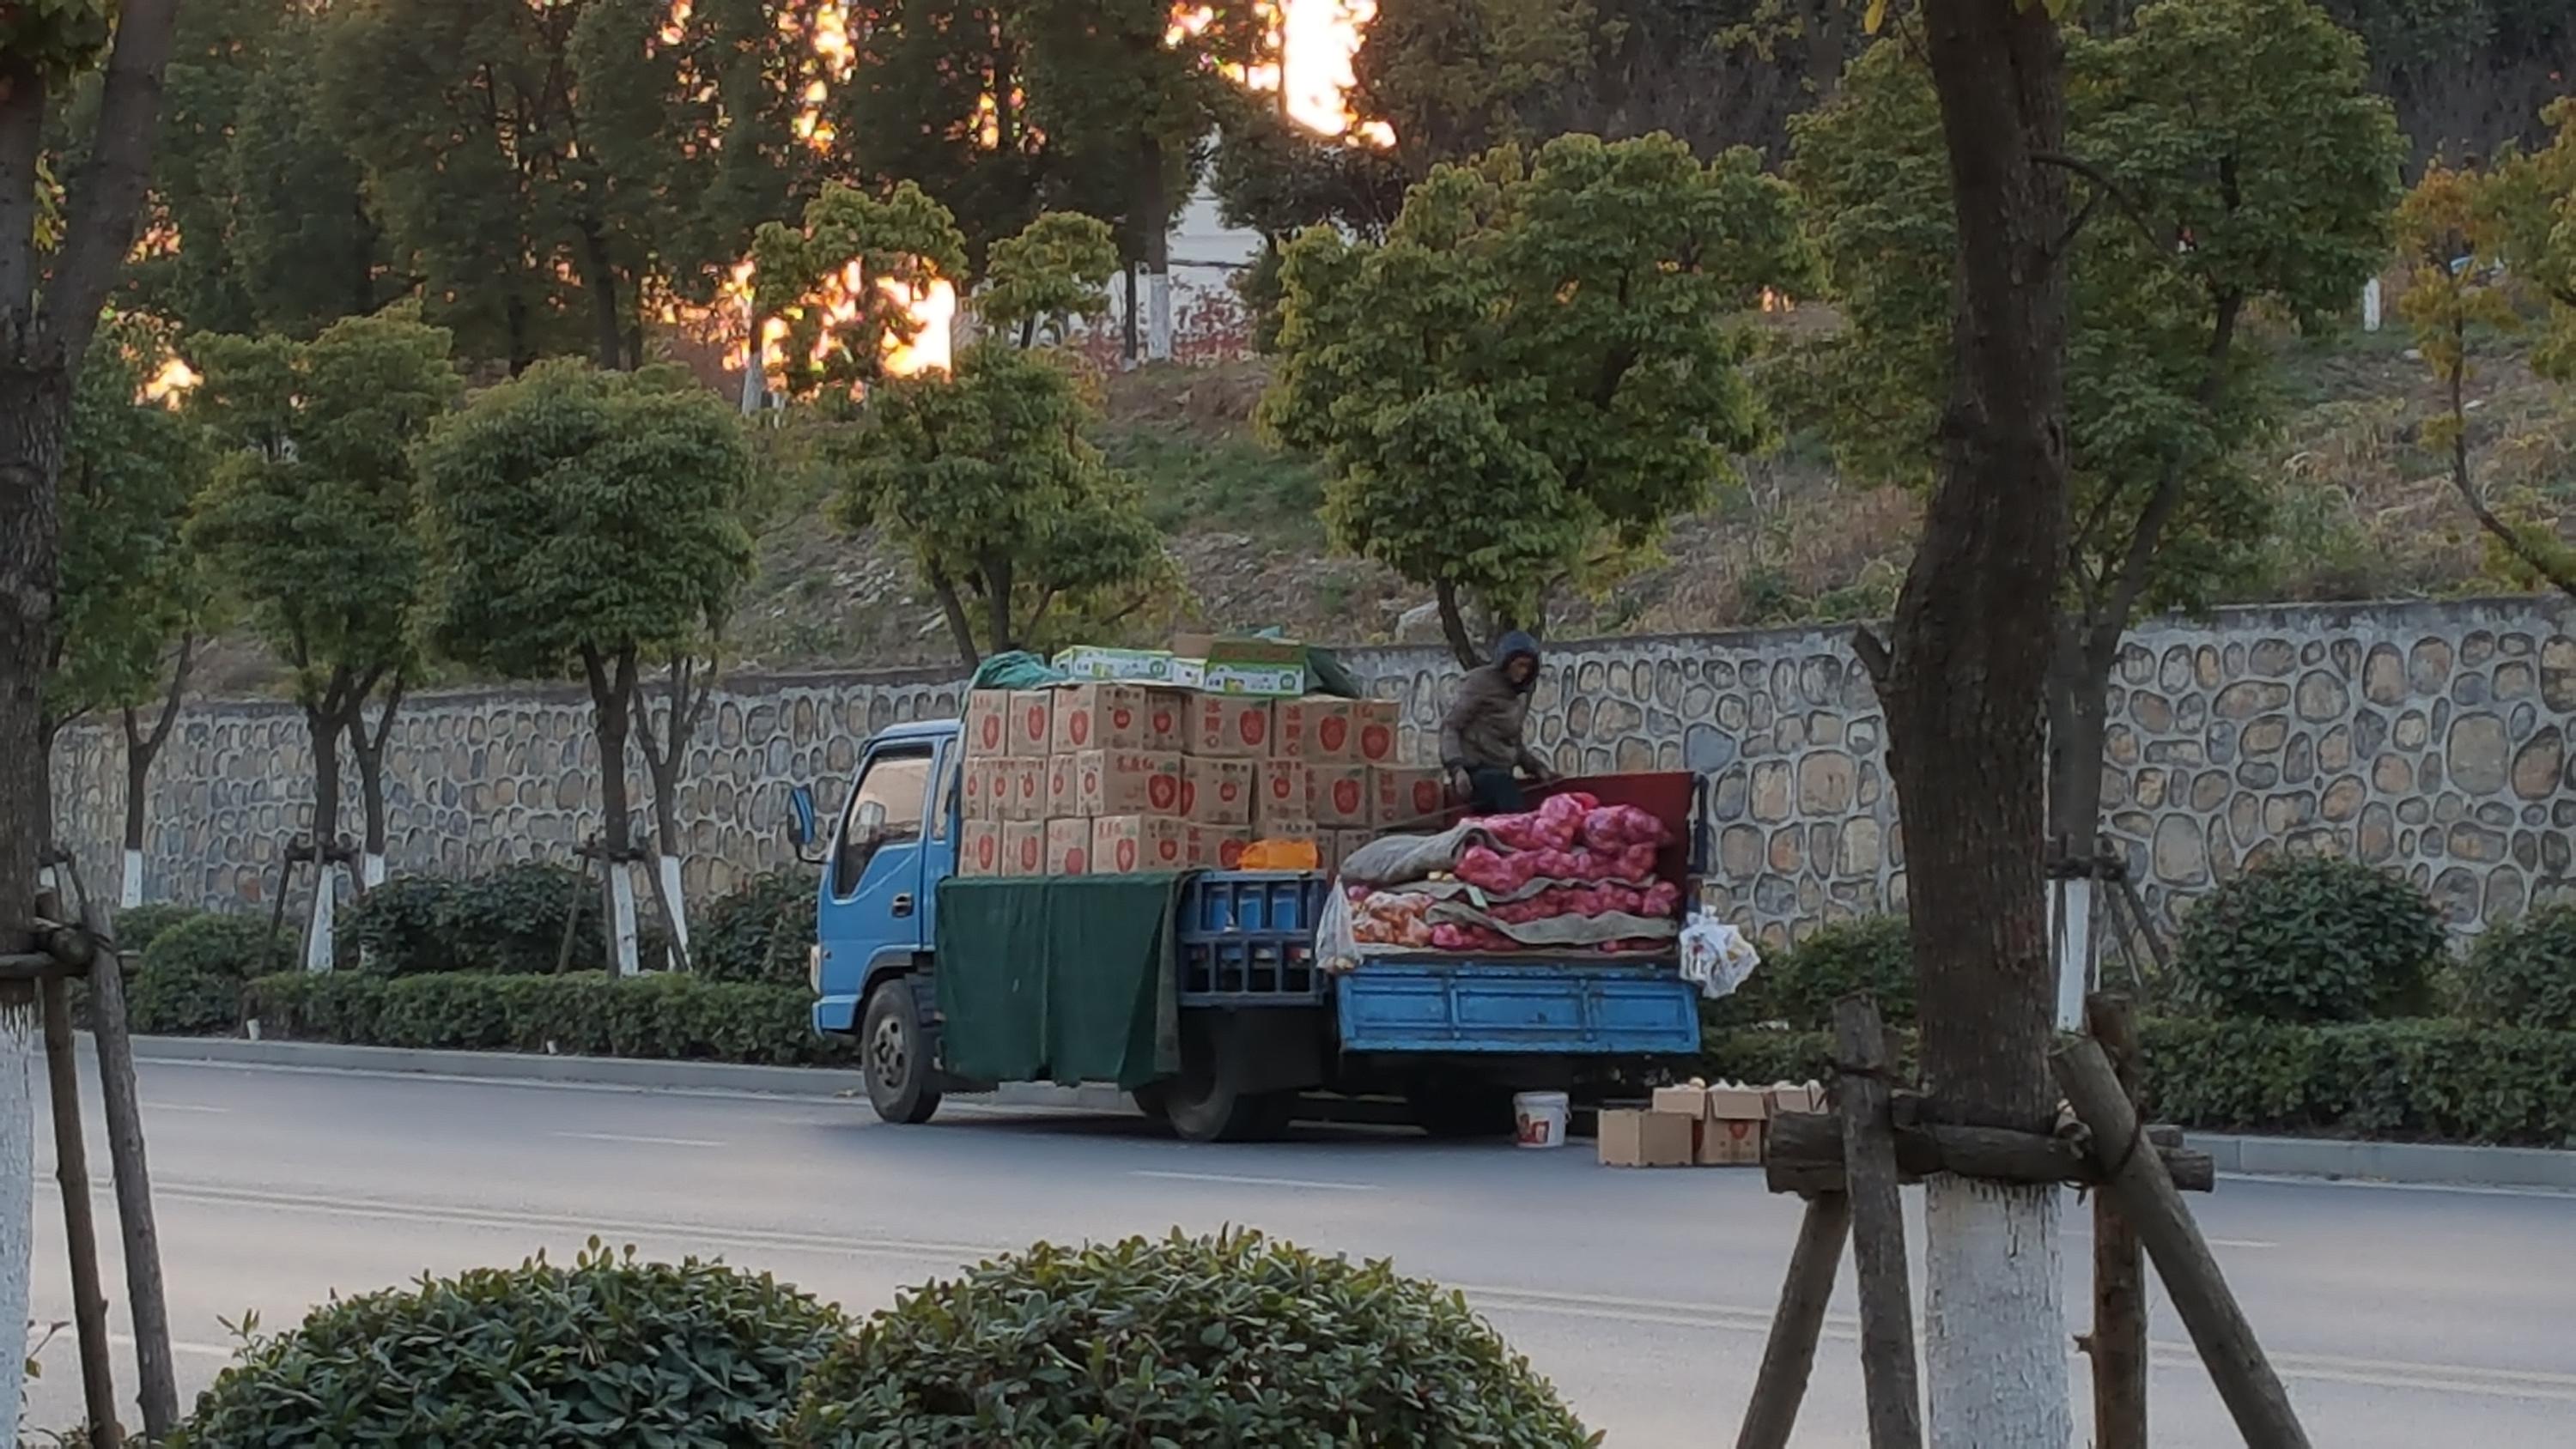 Vendors selling other vegetables in parked trucks